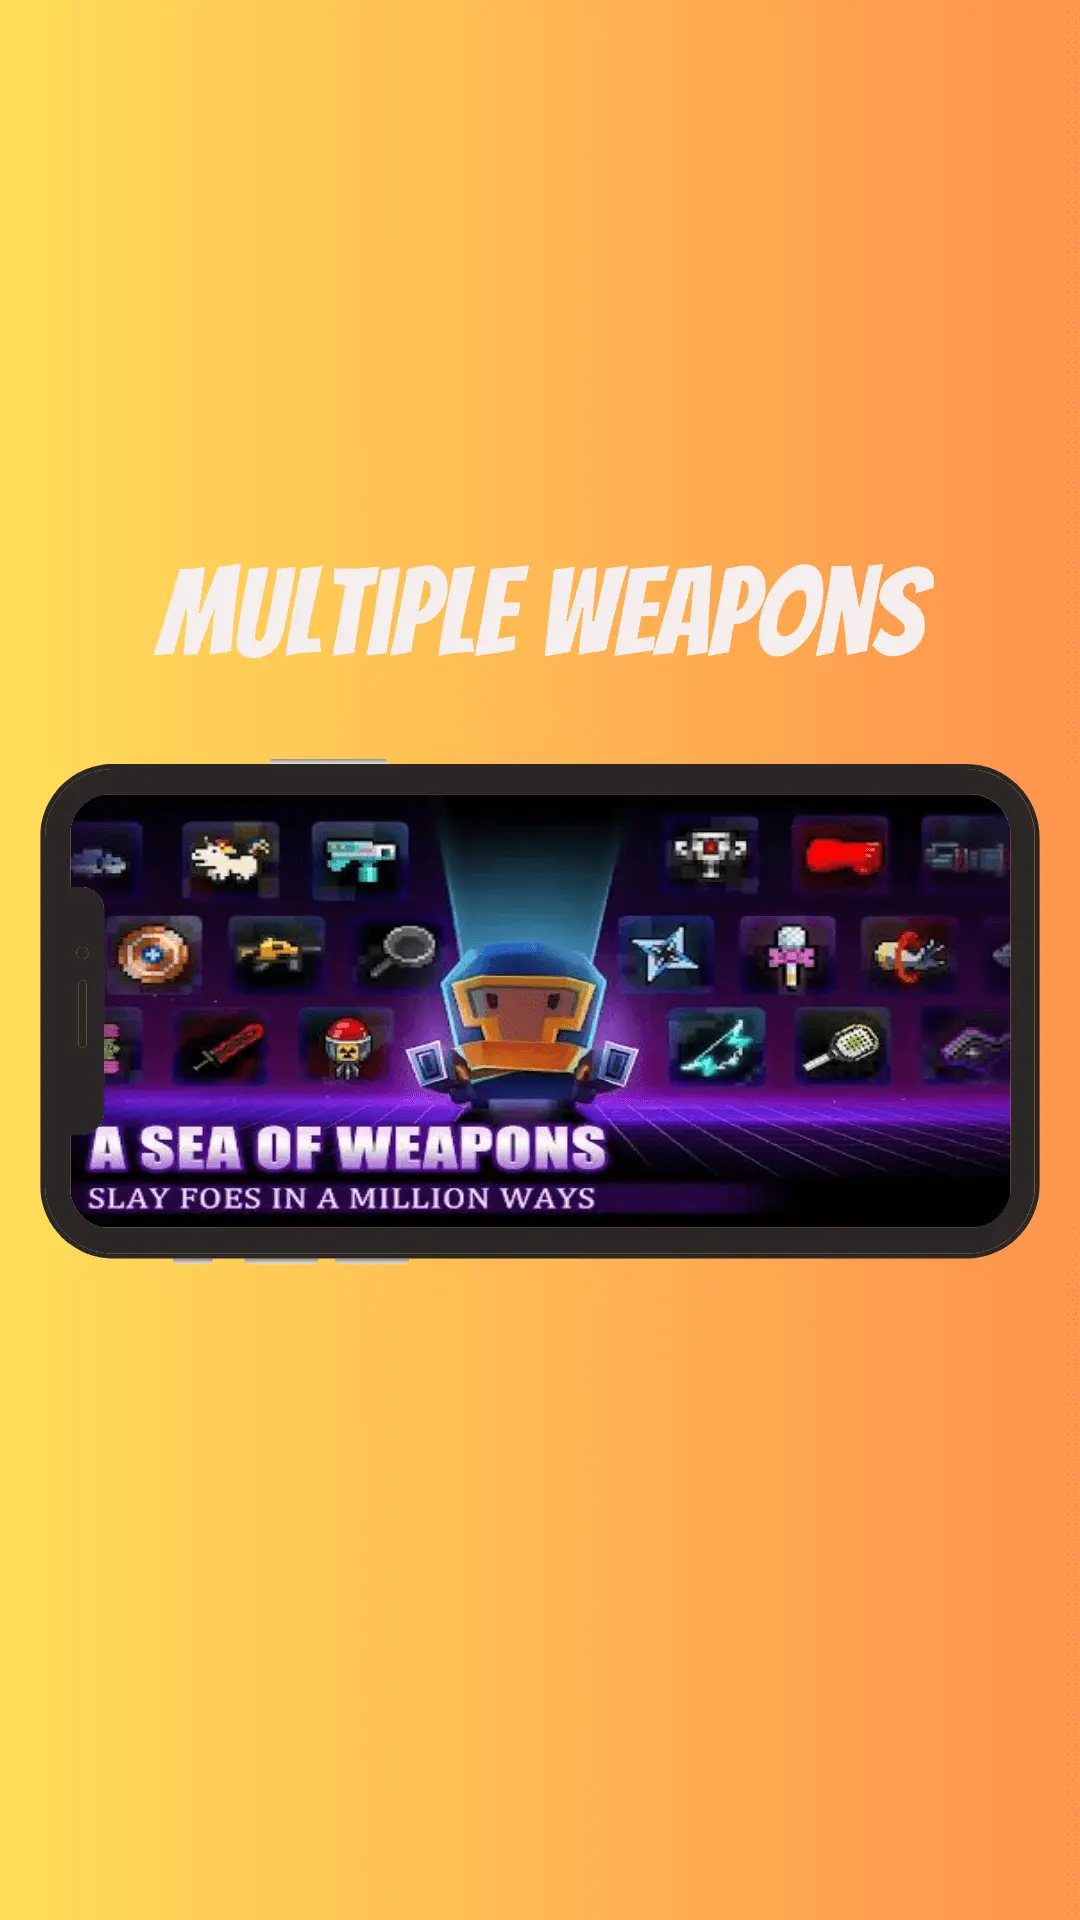 MULTIPLE WEAPONS